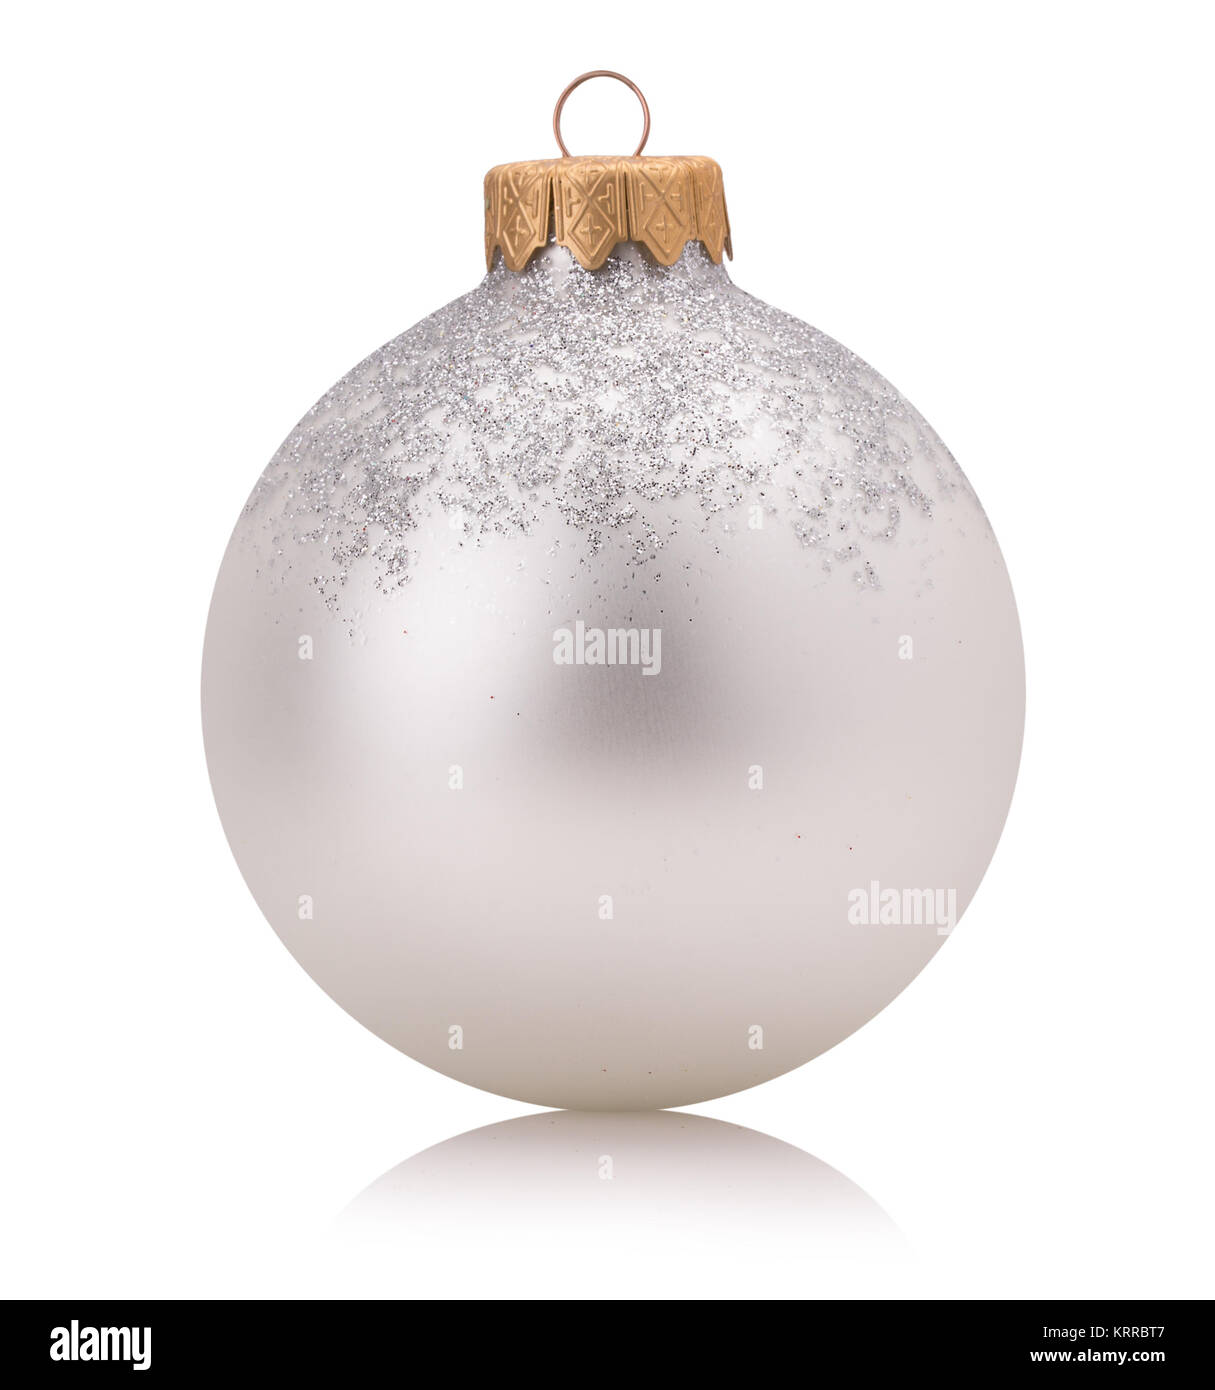 silverChristmas tree ball isolated on a white background. Stock Photo